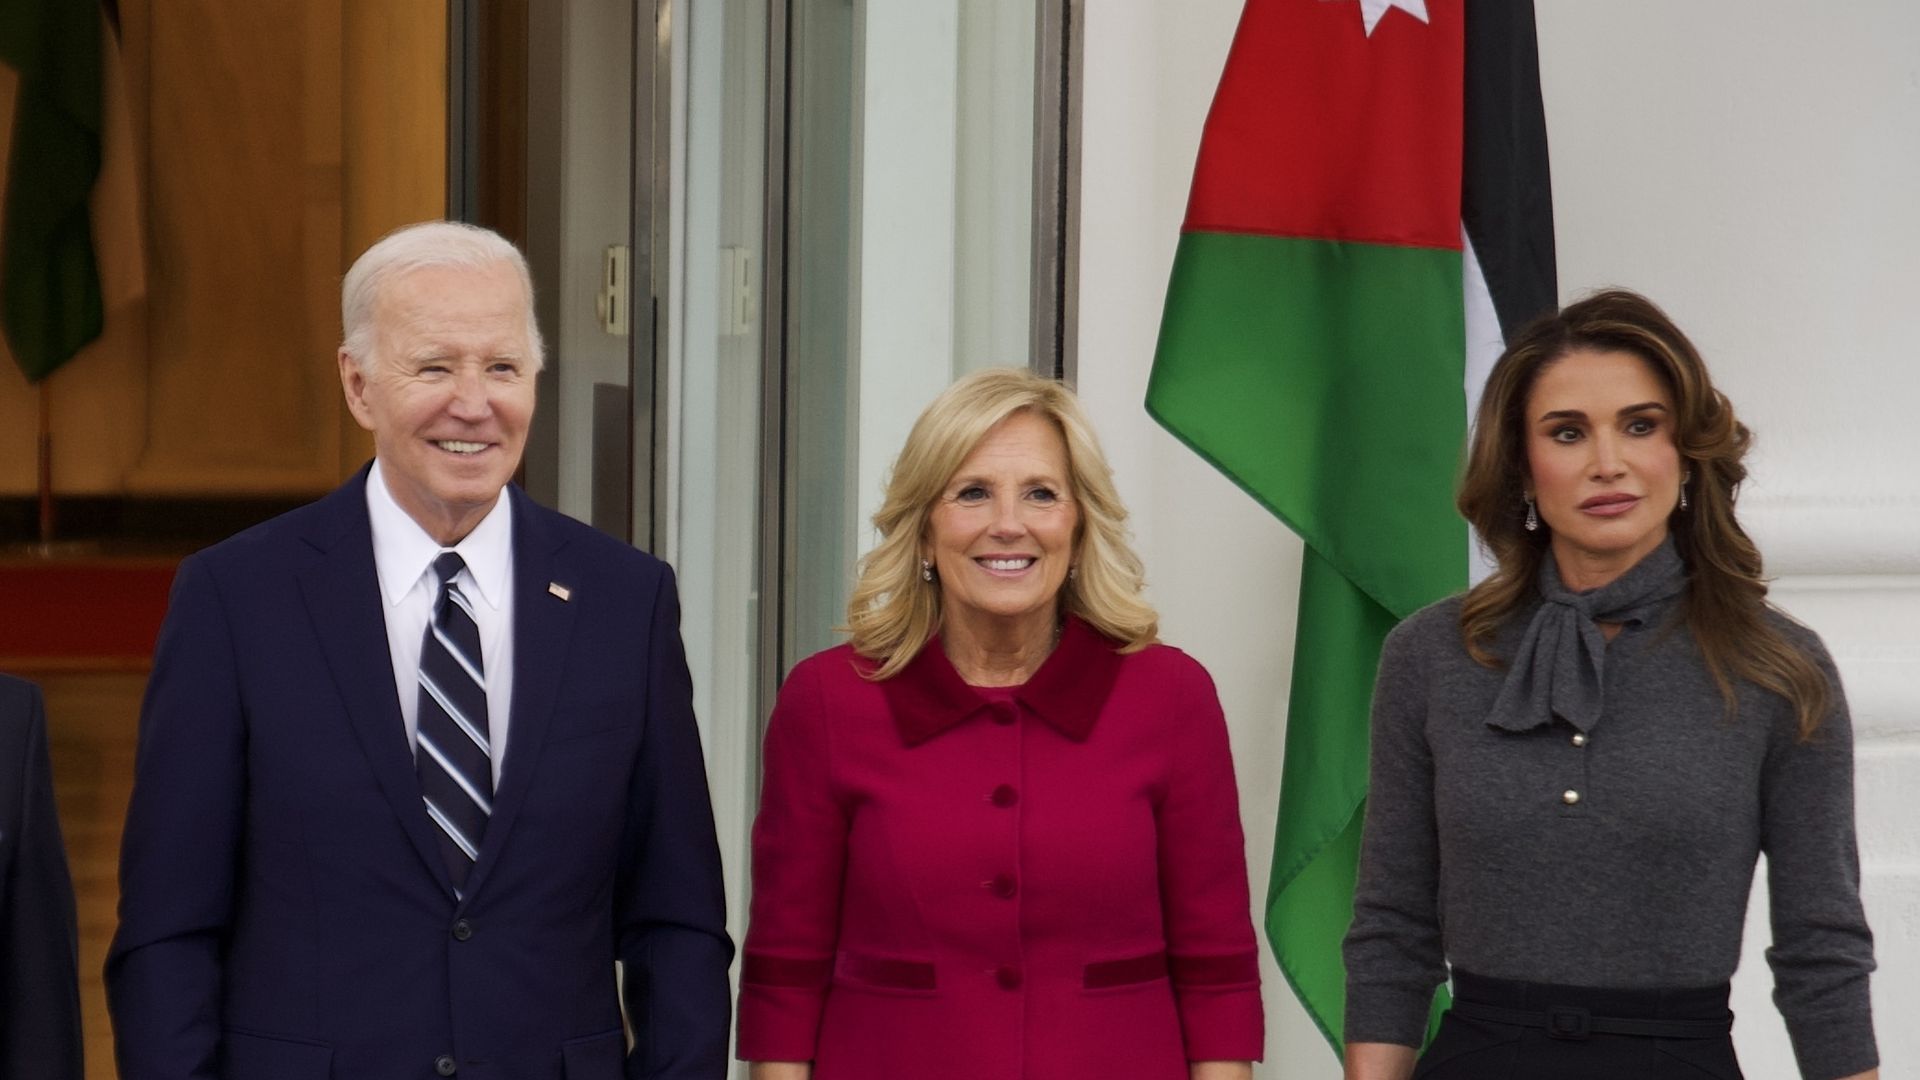 Joe Biden calls Queen Rania by a different name after White House meeting - watch